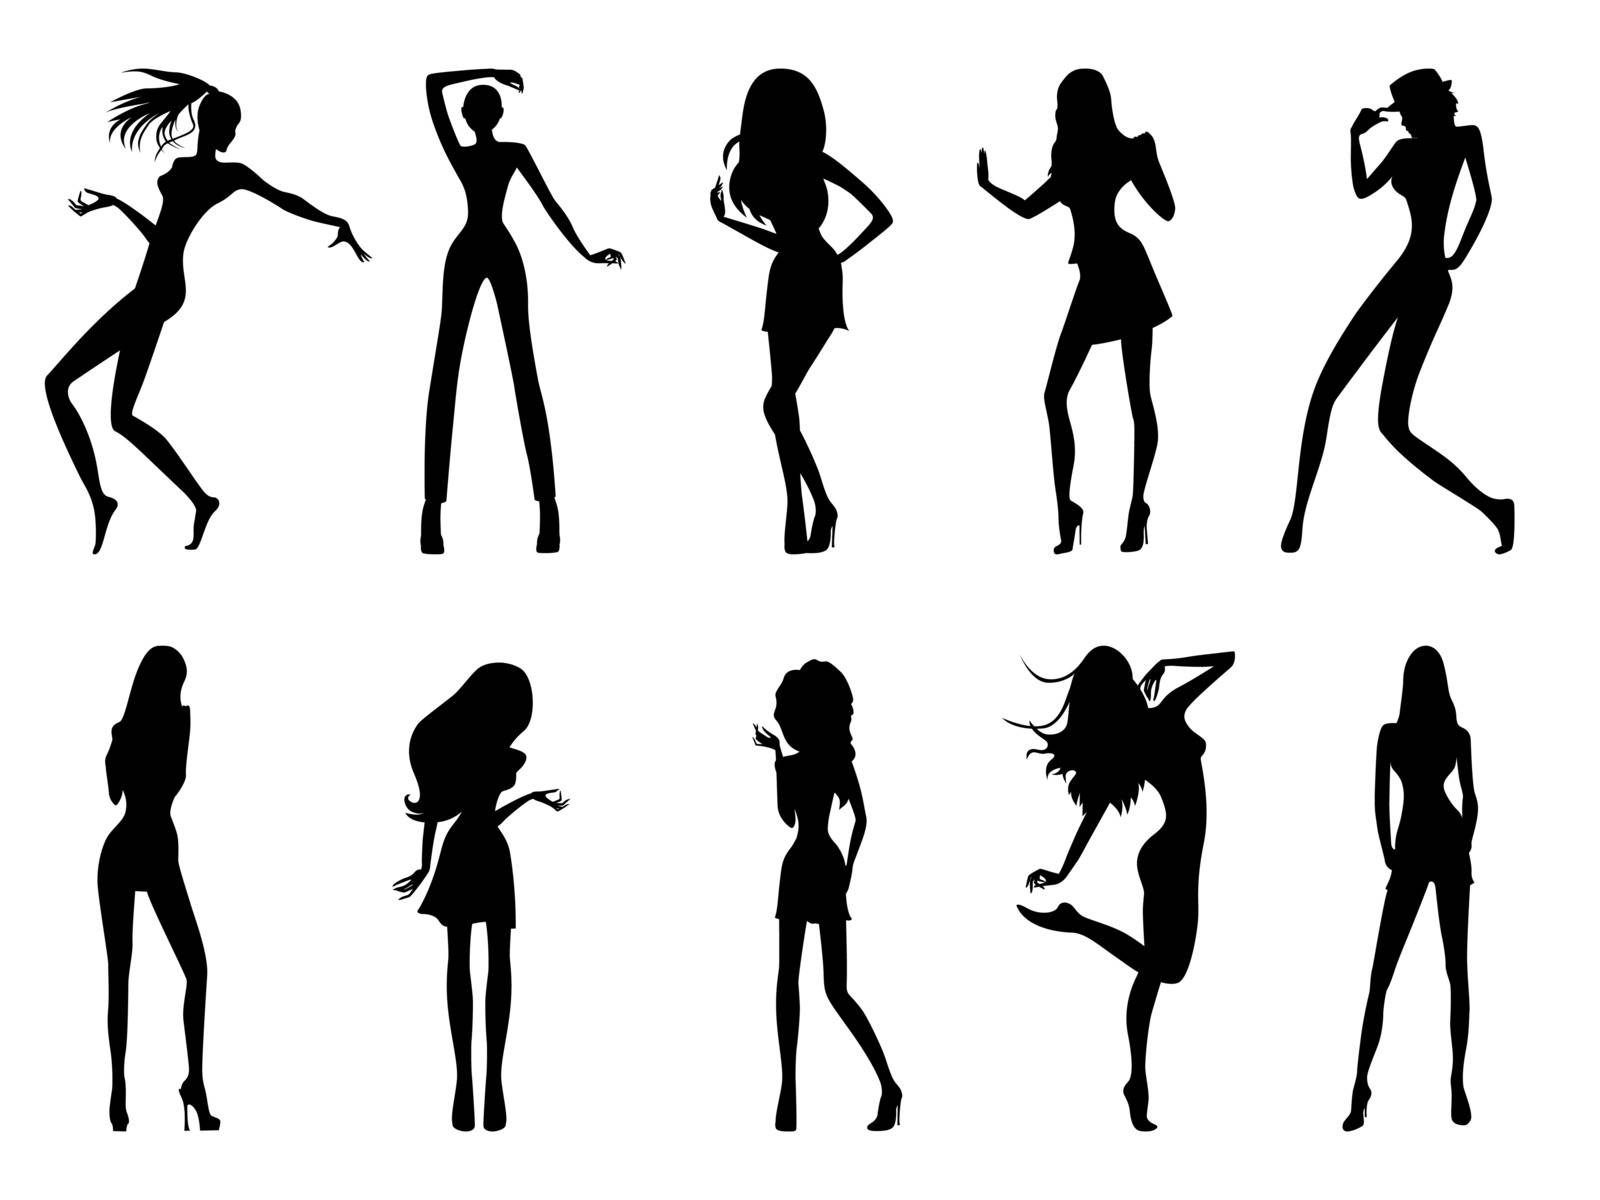 Fashionable model silhouettes by natareal